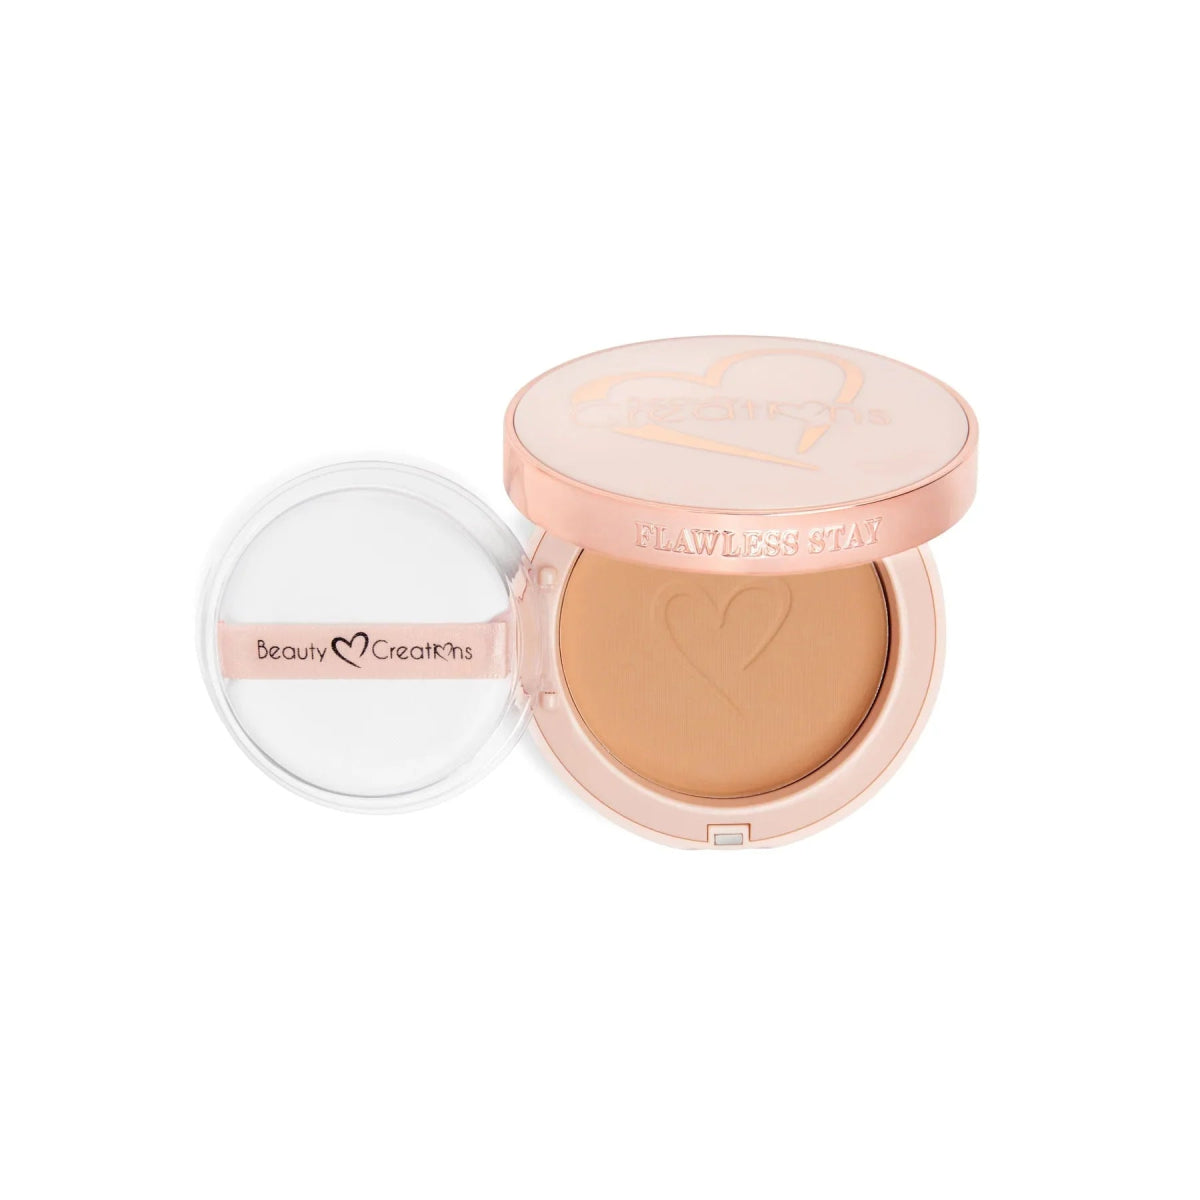 BCC Backup-Cosmetics-Beauty Creations - Base En Polvo Flawless Stay - Polvo Compacto-FSP12.5